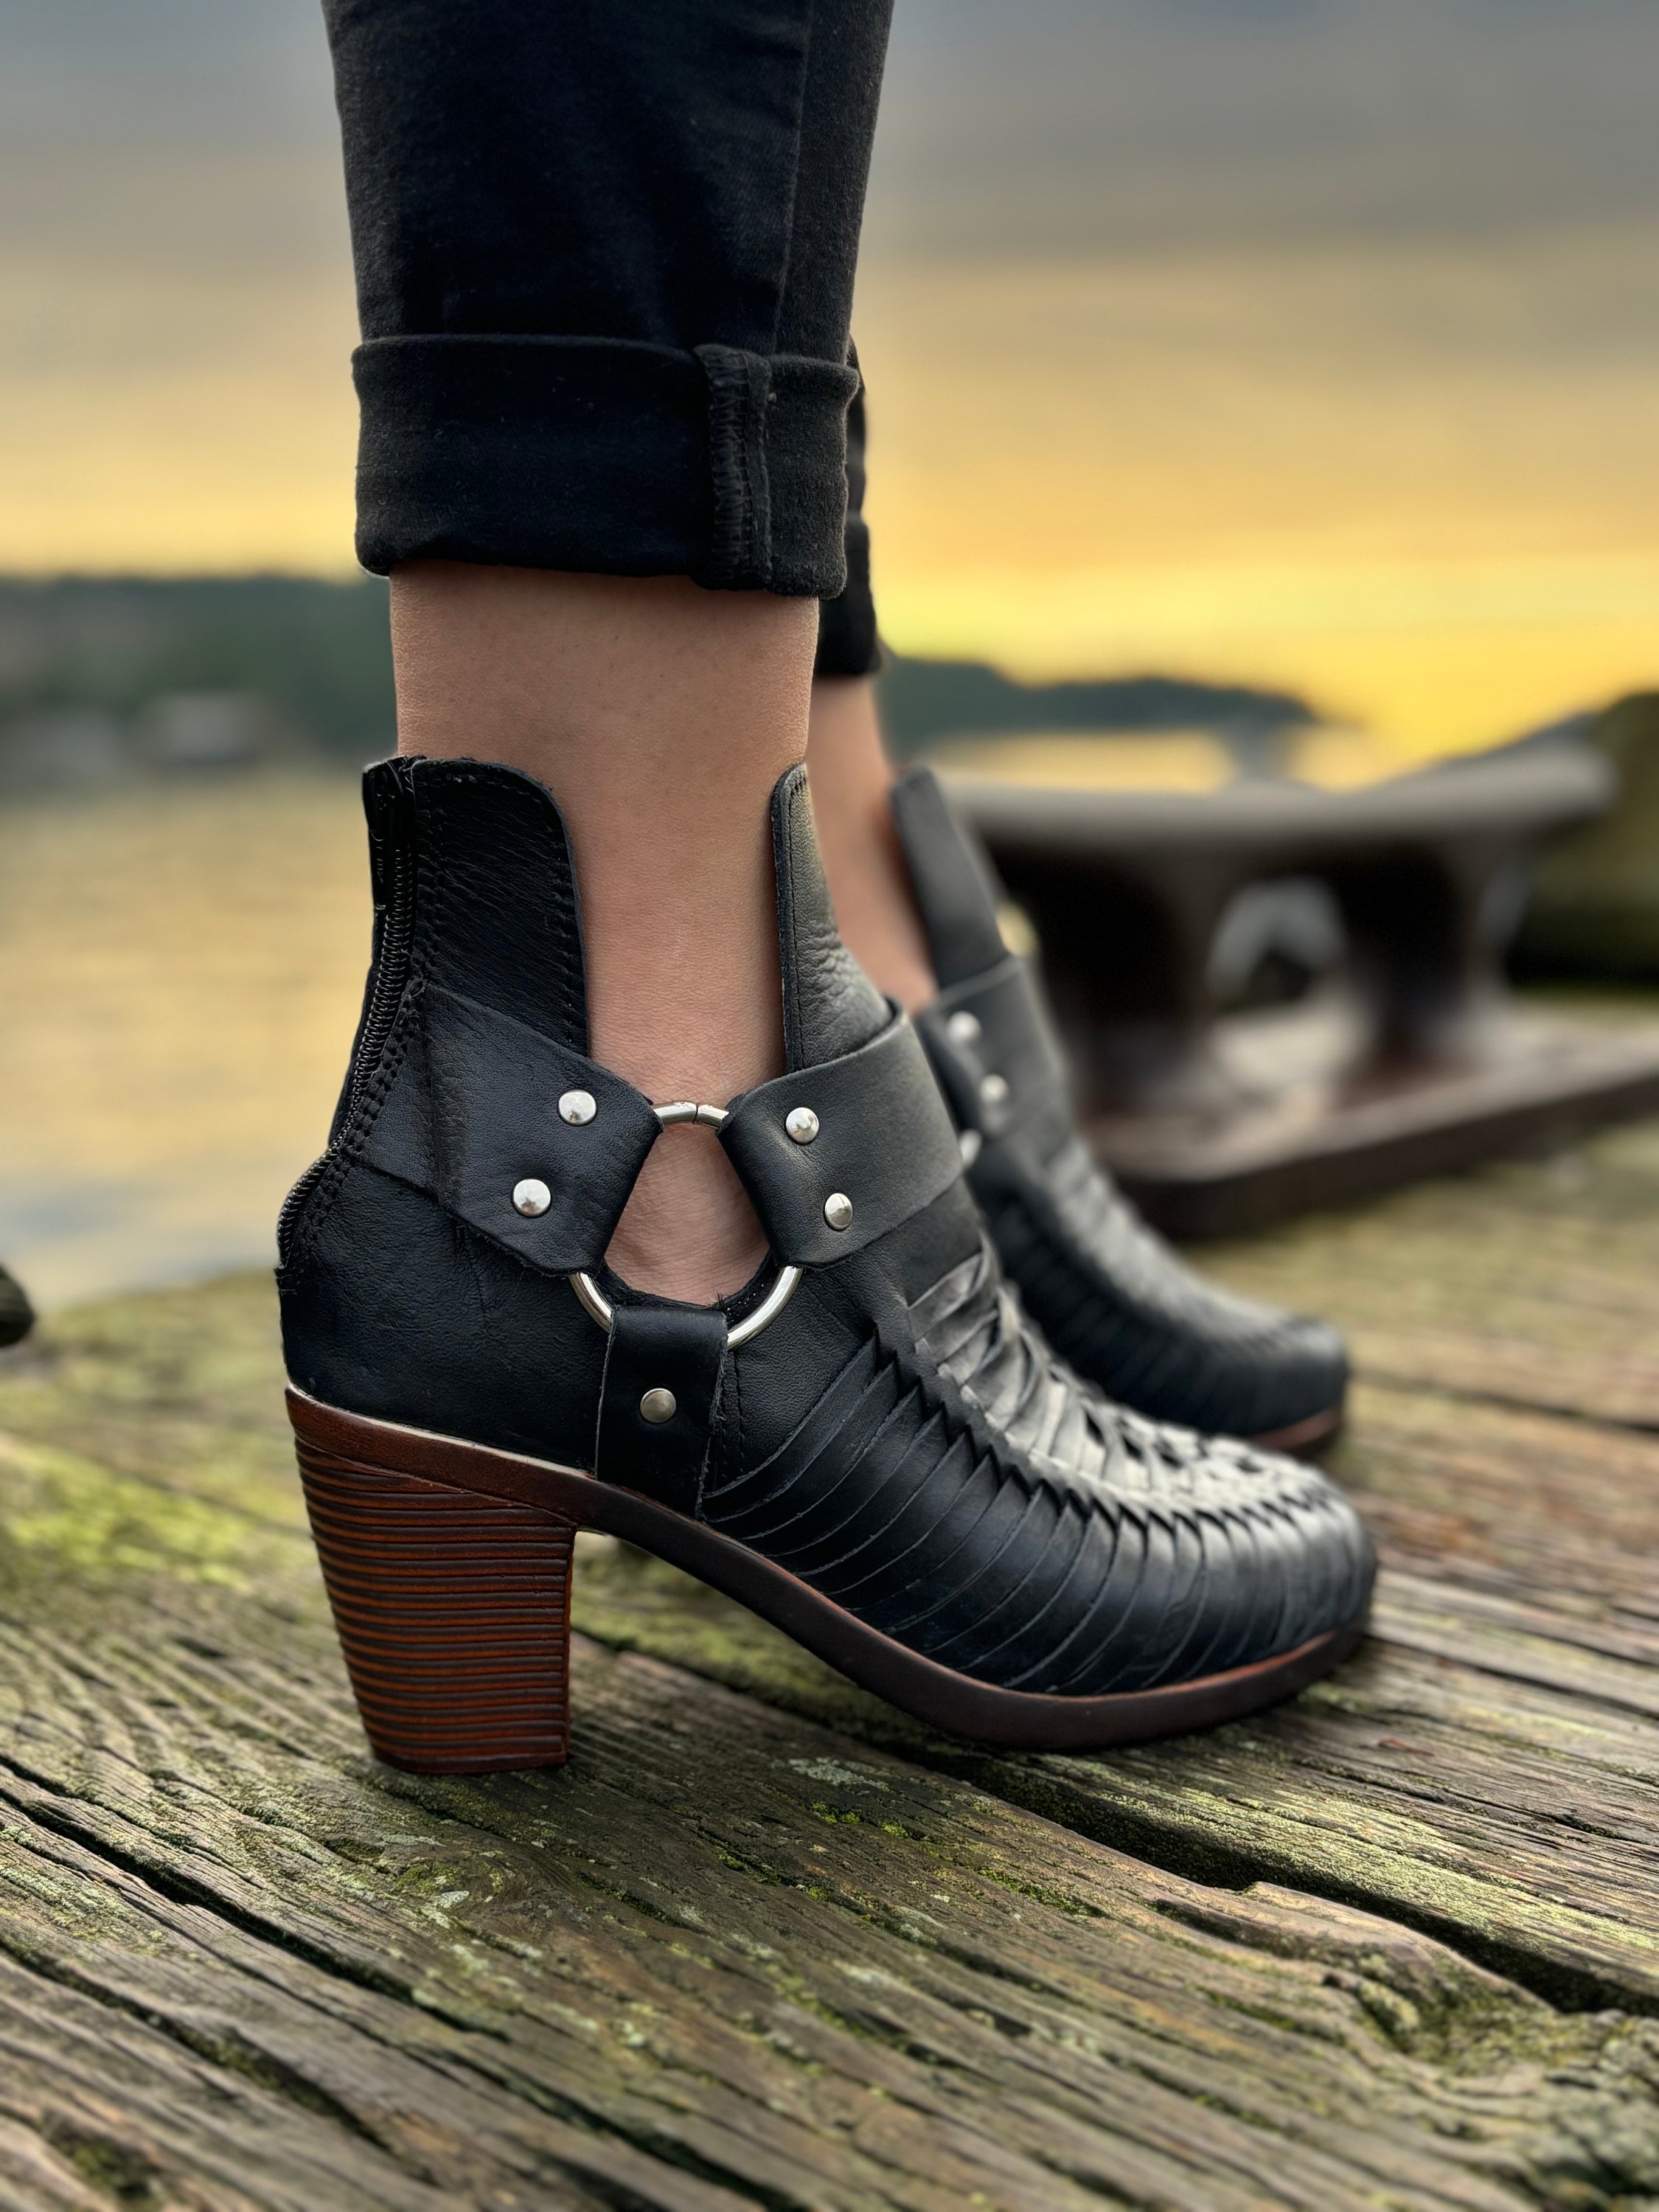 8 Stylish Boots for Women | Vionic Shoes Canada